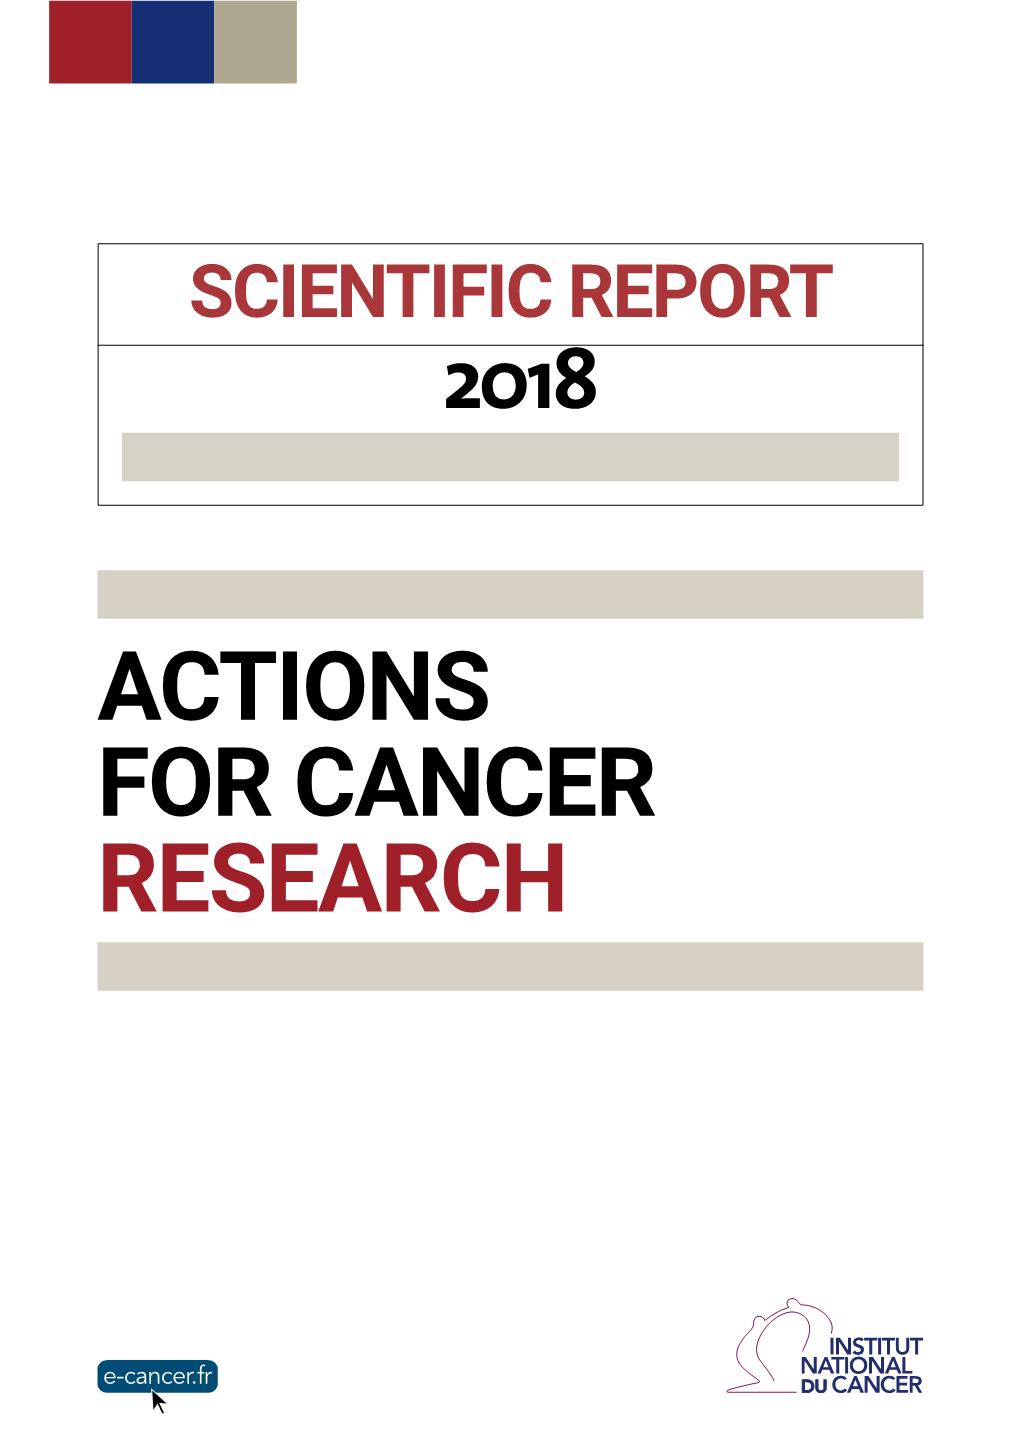 Actions for Cancer Research Scientific Report 2018 2Actions for Cancer Research